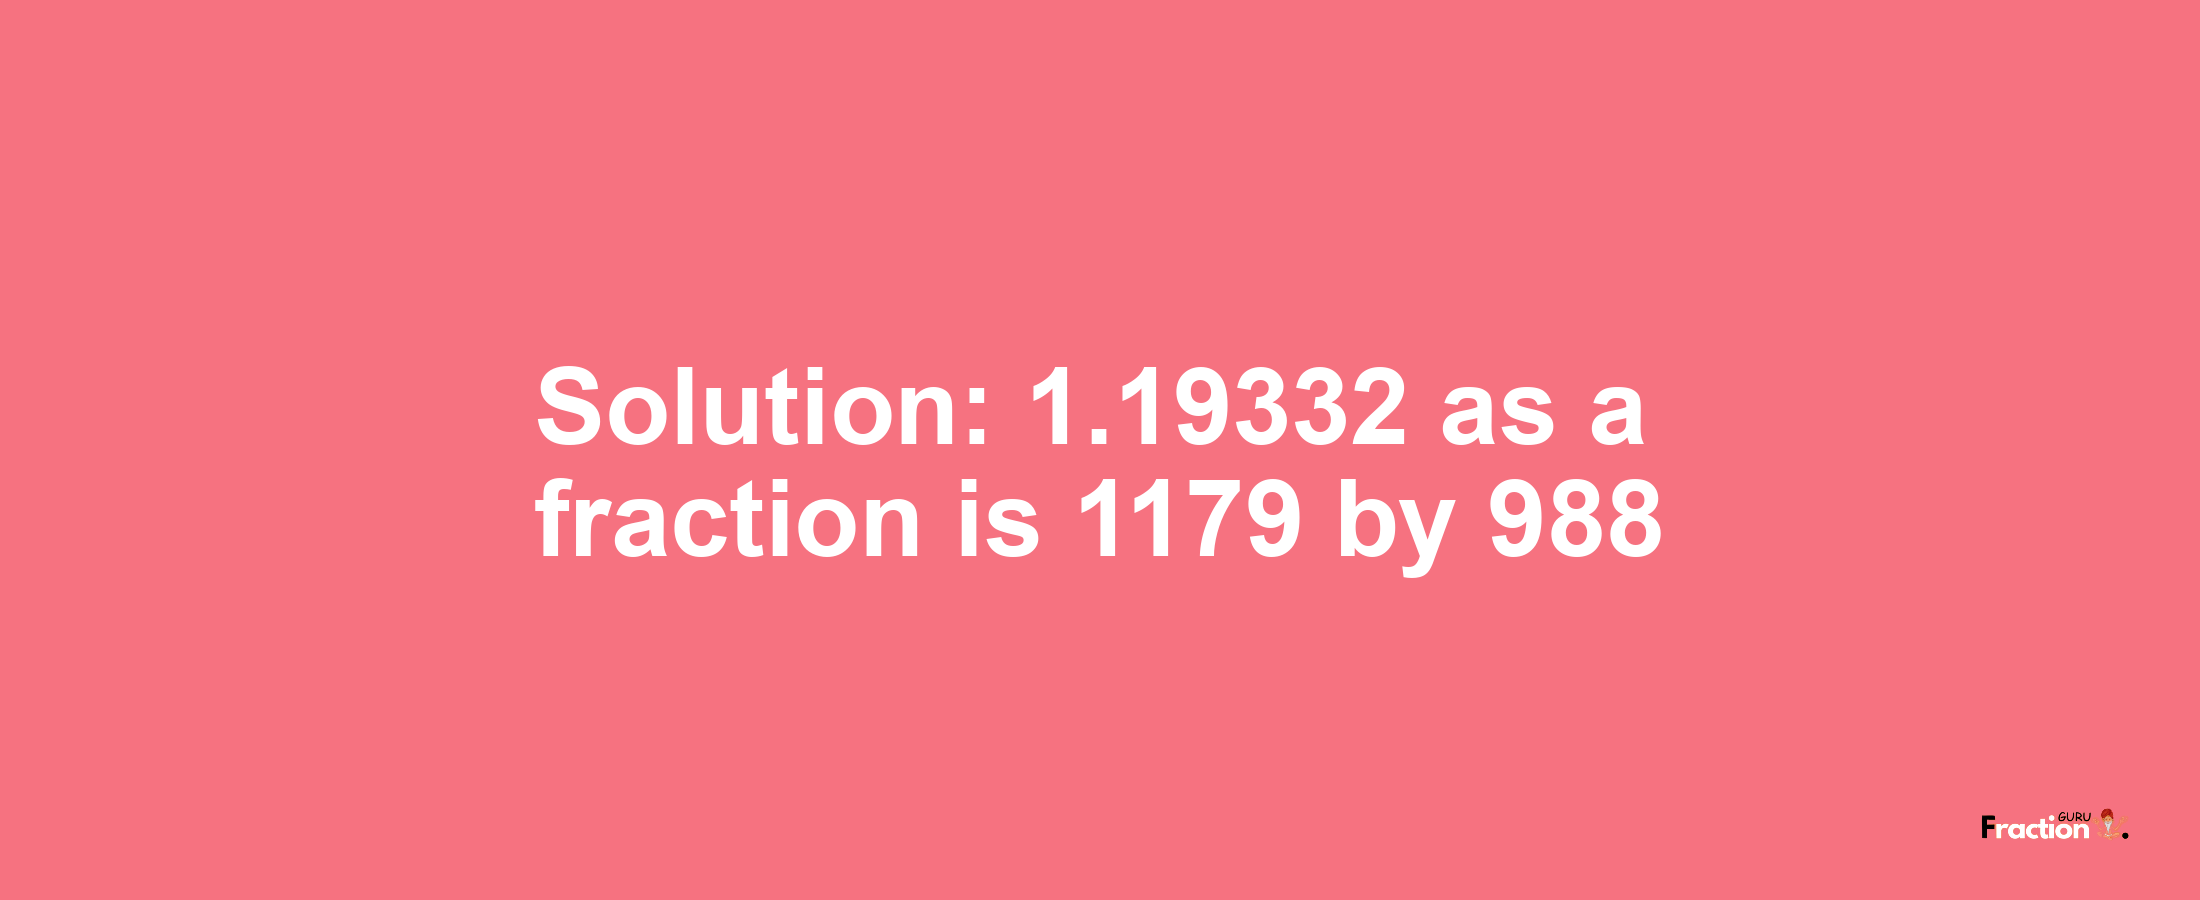 Solution:1.19332 as a fraction is 1179/988